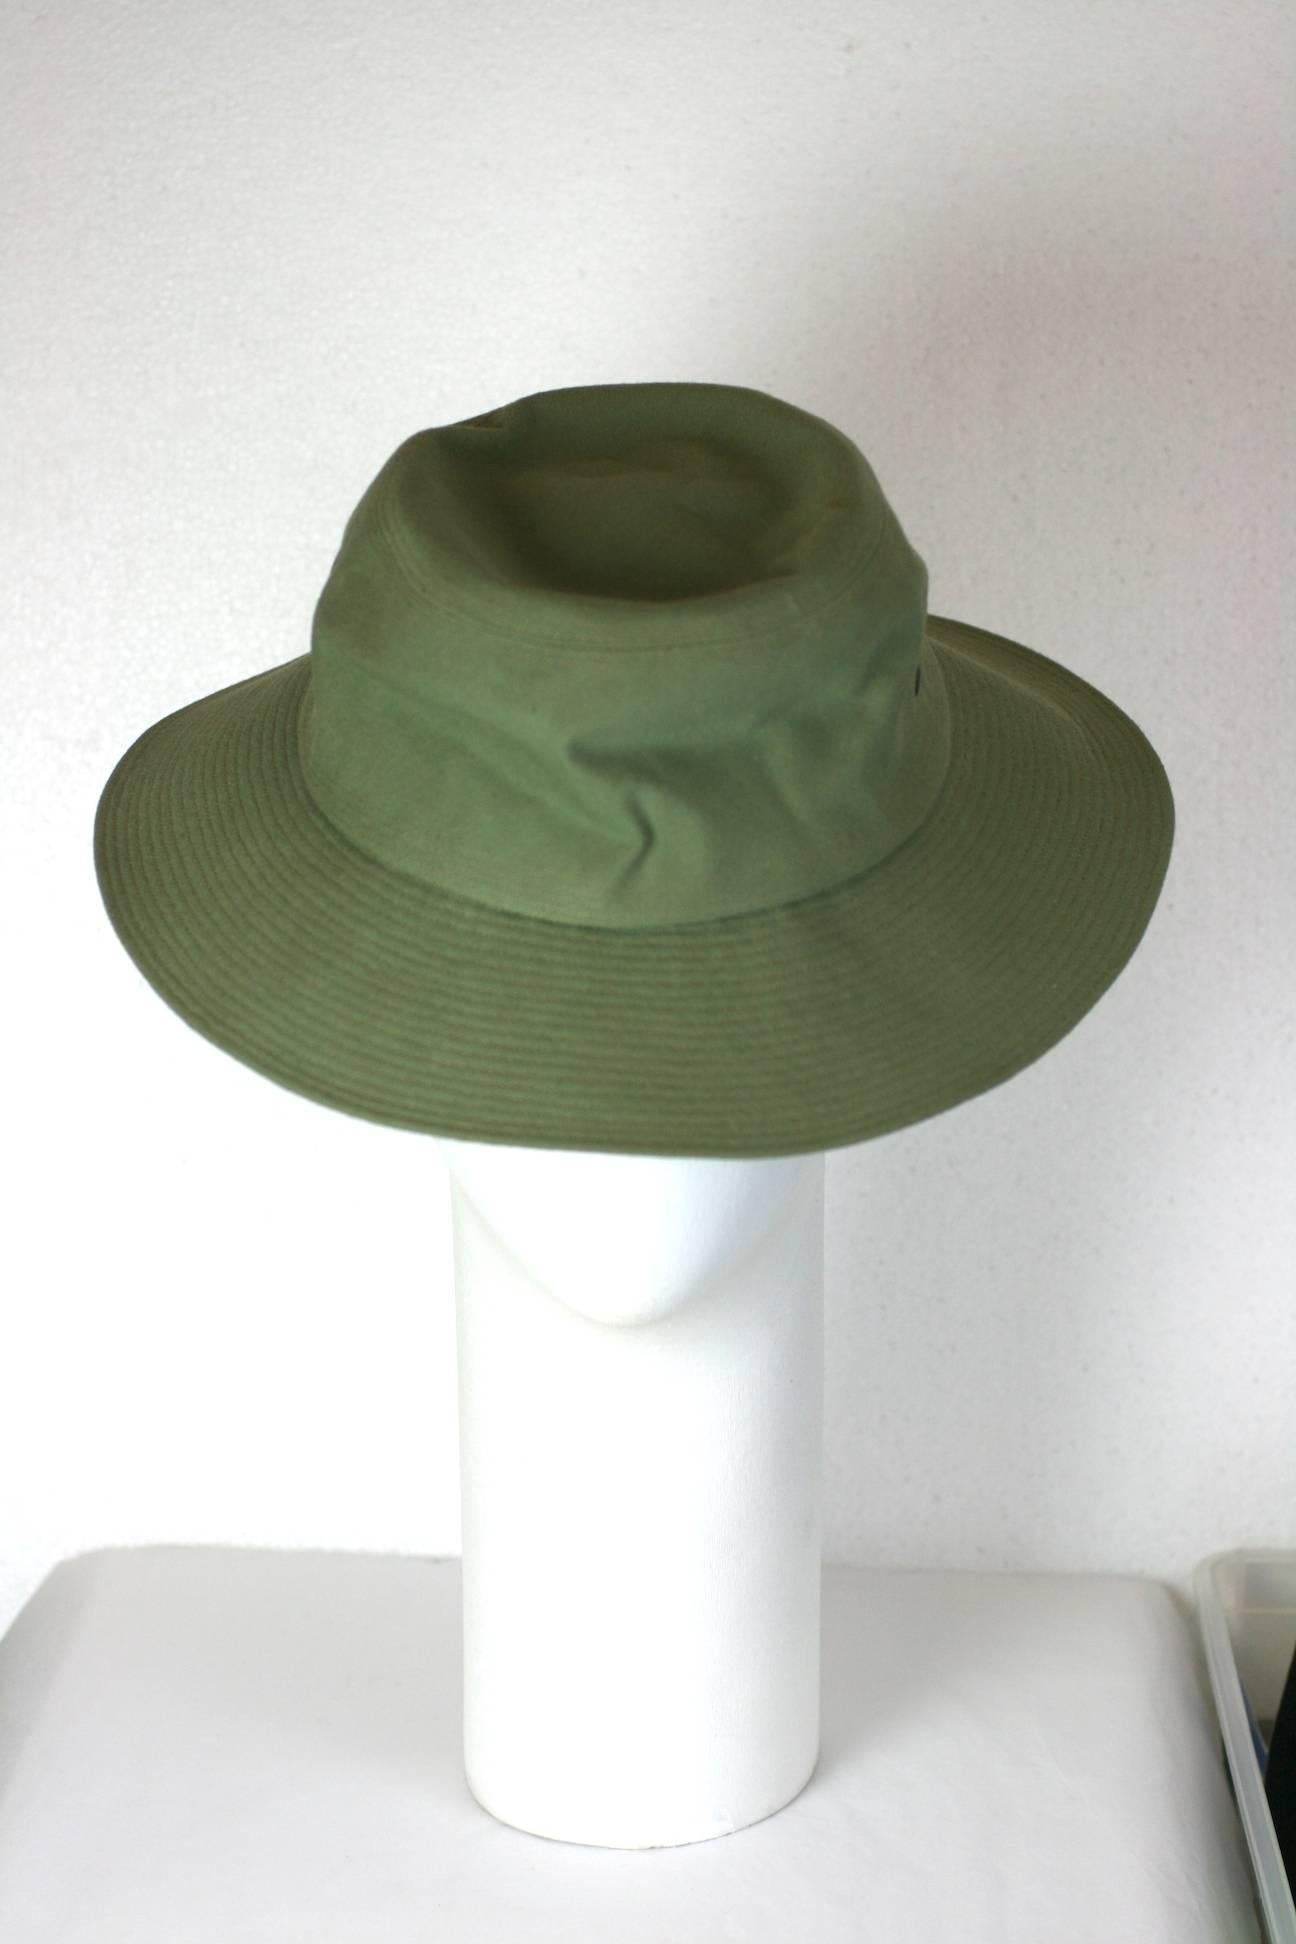 Yves Saint Laurent Fisherman Hat, by Alber Elbaz. A version of the famous YSL hat made in the 1960's. This brim of this cotton canvas hat is topstitched and is slightly deeper in the back. 
Very Good condition. Small mark near top, see image.